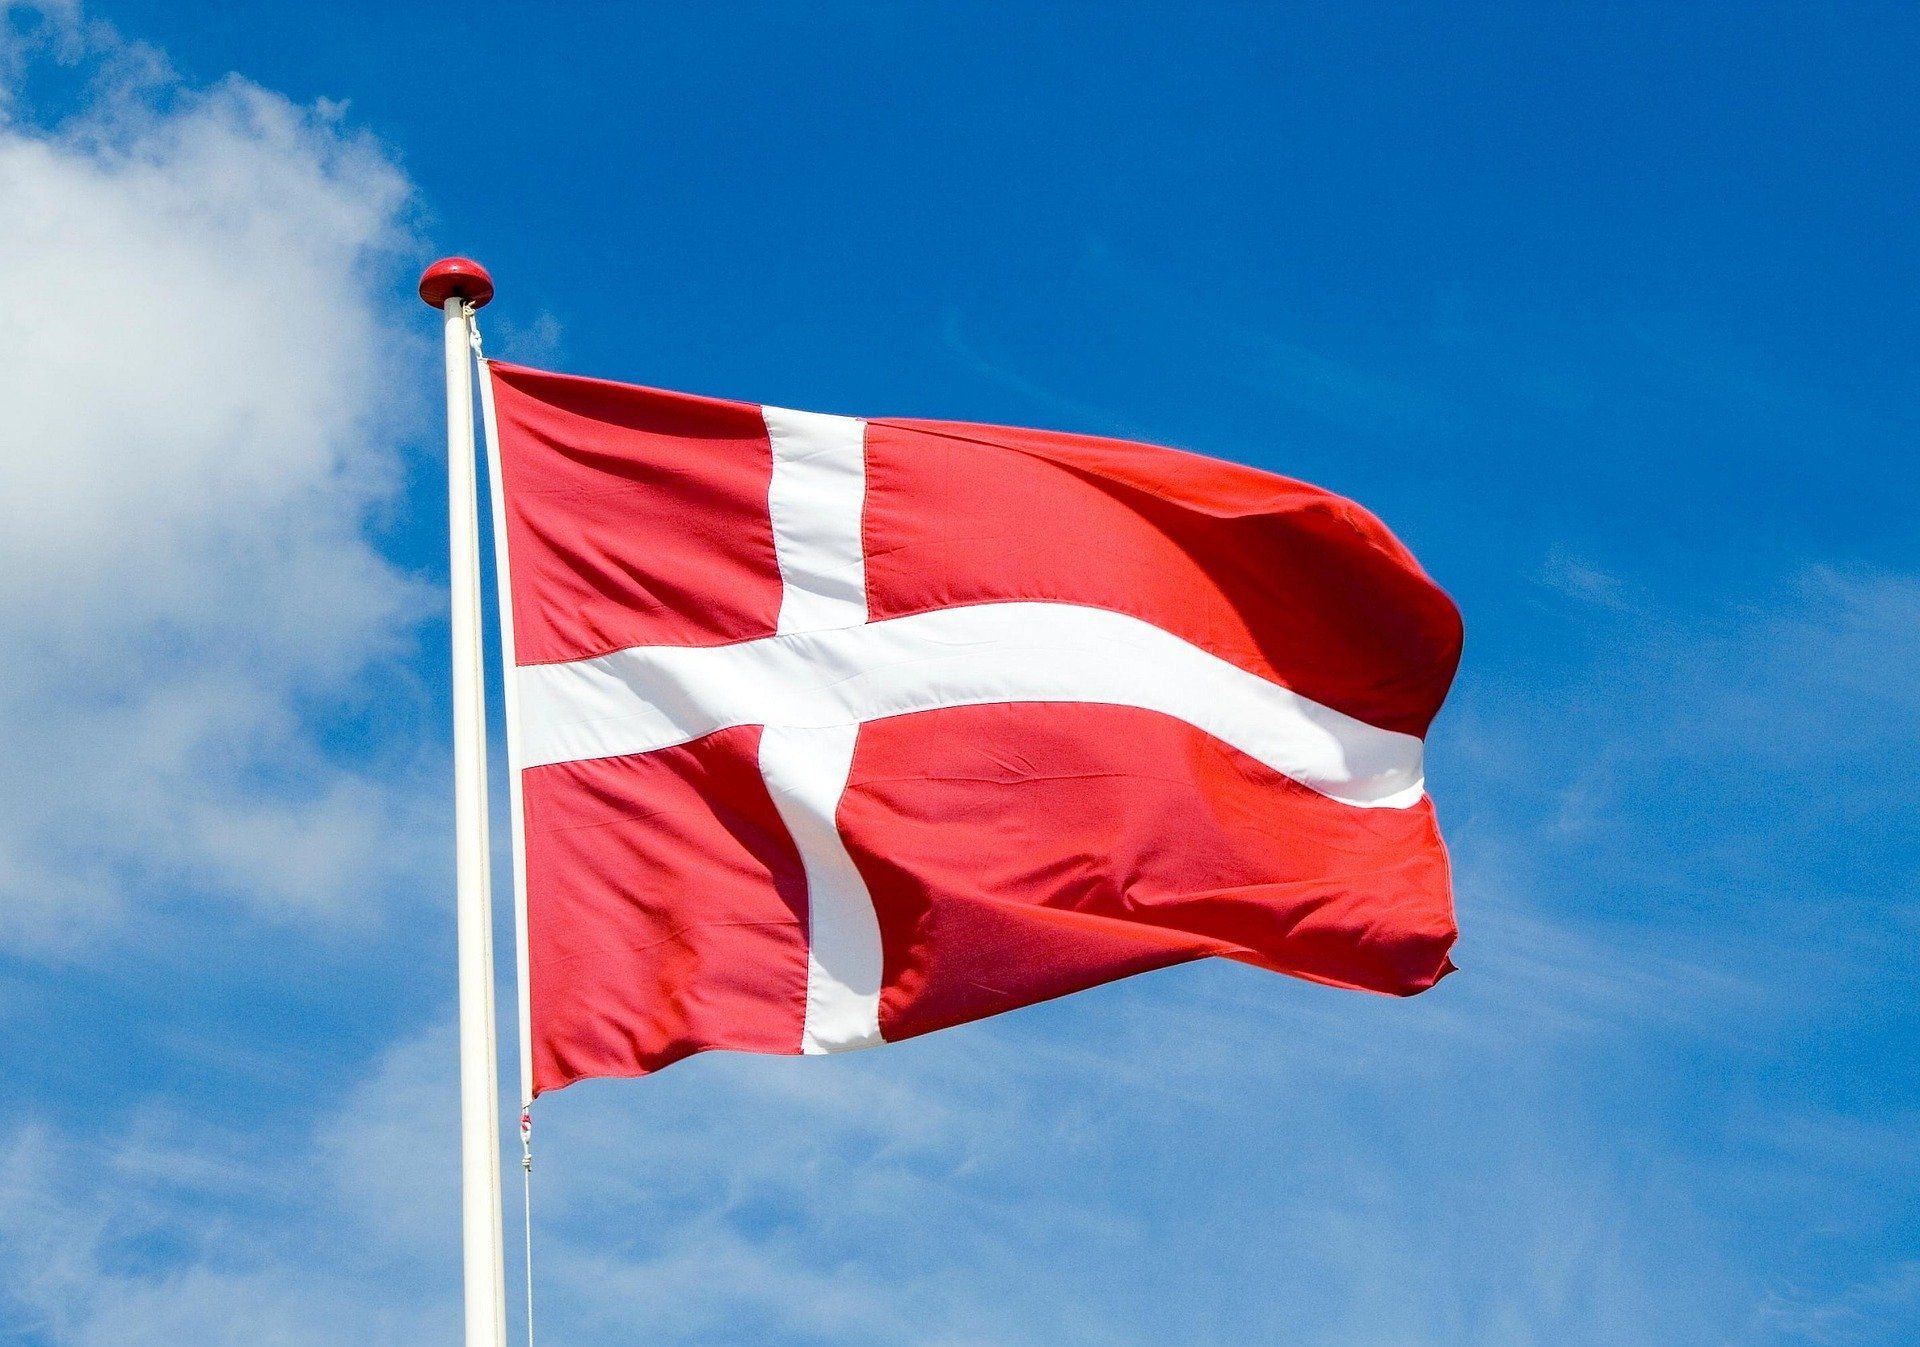 Danish government wants to expel all foreigners who receive prison sentences